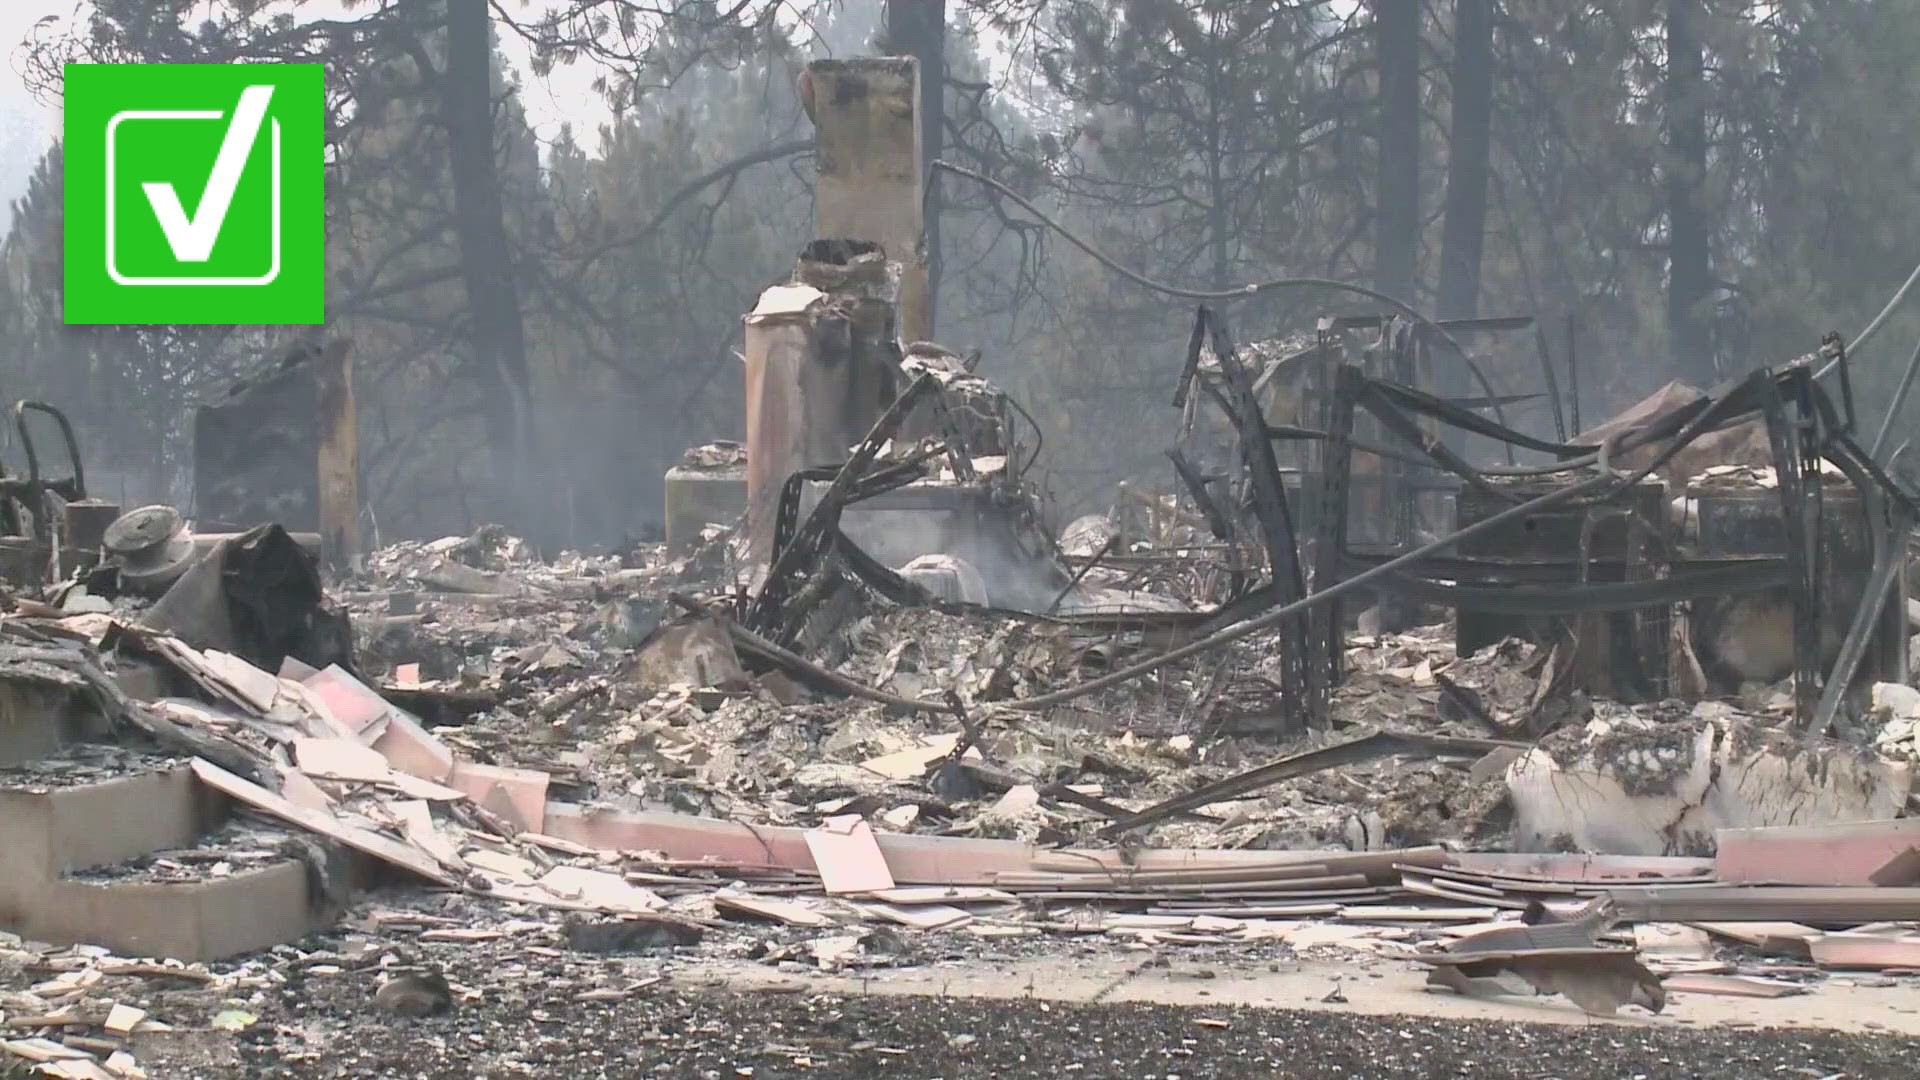 The Oregon Road and Gray Fires destroyed hundreds of buildings in Spokane County, homeowners reached out to Verify with questions about what their insurance covers.